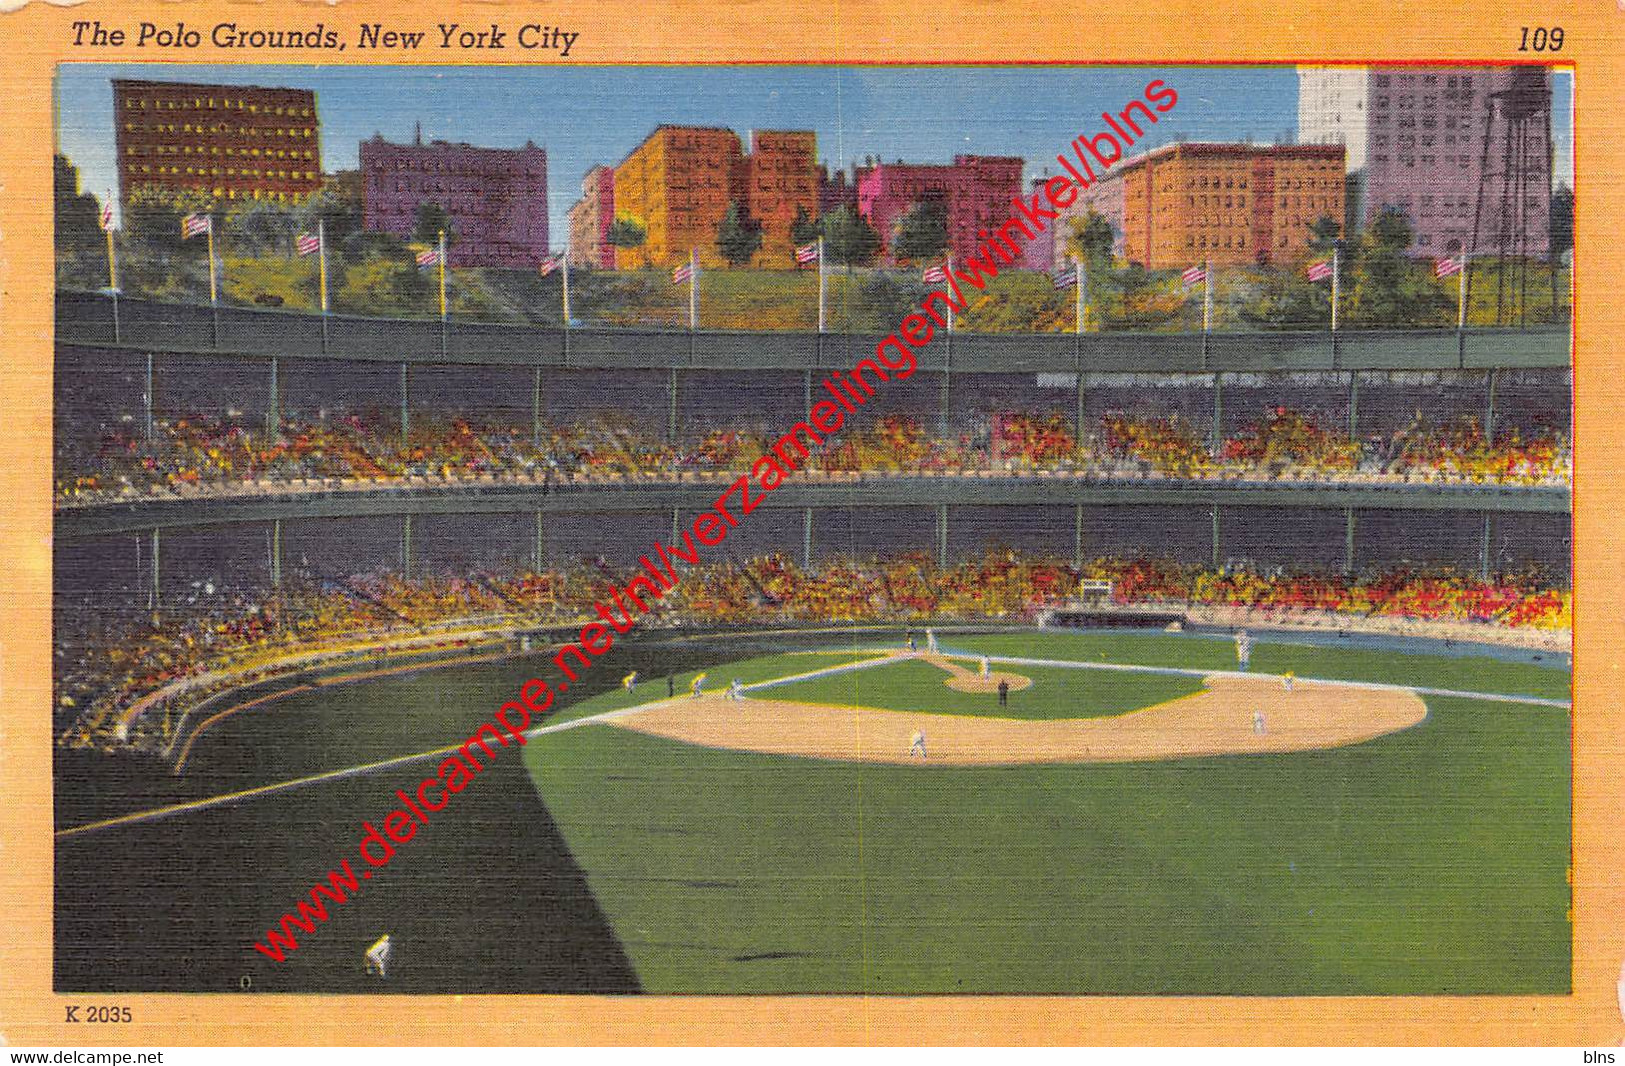 Polo Grounds Stadium - New York Giants - Baseball - New York - United States USA - Stades & Structures Sportives